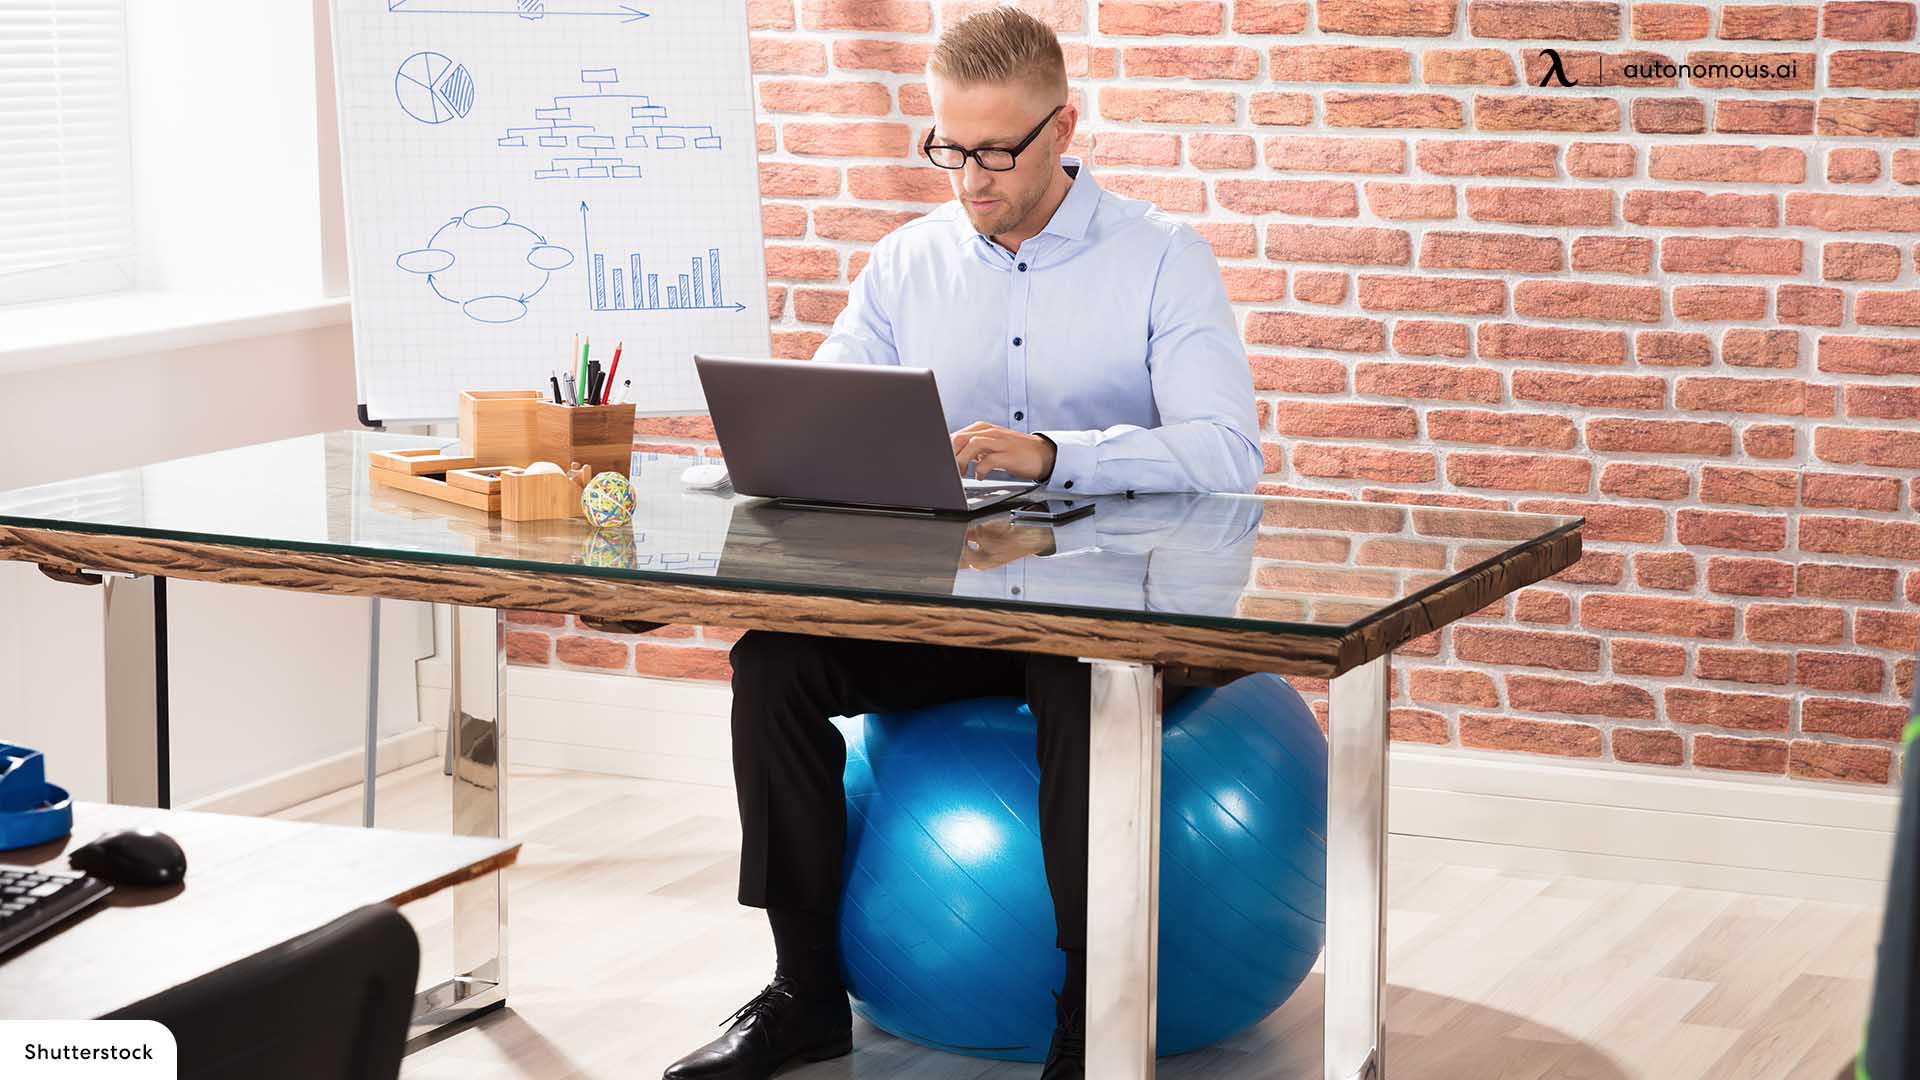 Enhanced posture with Exercise Balls